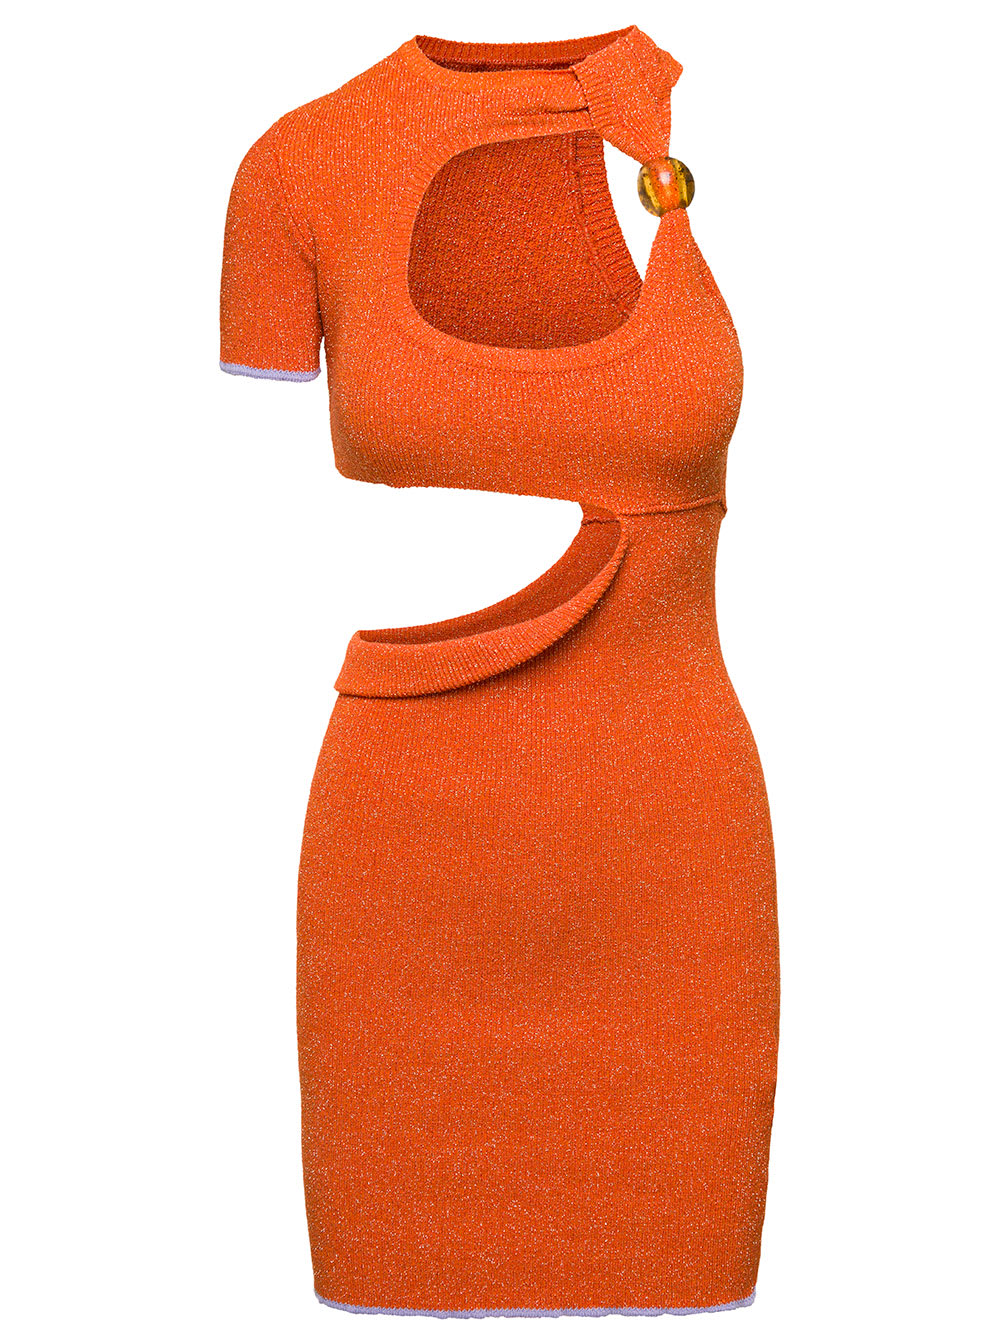 JACQUEMUS LA ROBE BRILHO MINI ORANGE DRESS WITH BEAD DETAIL AND CUT-OUT IN LUREX WOMAN